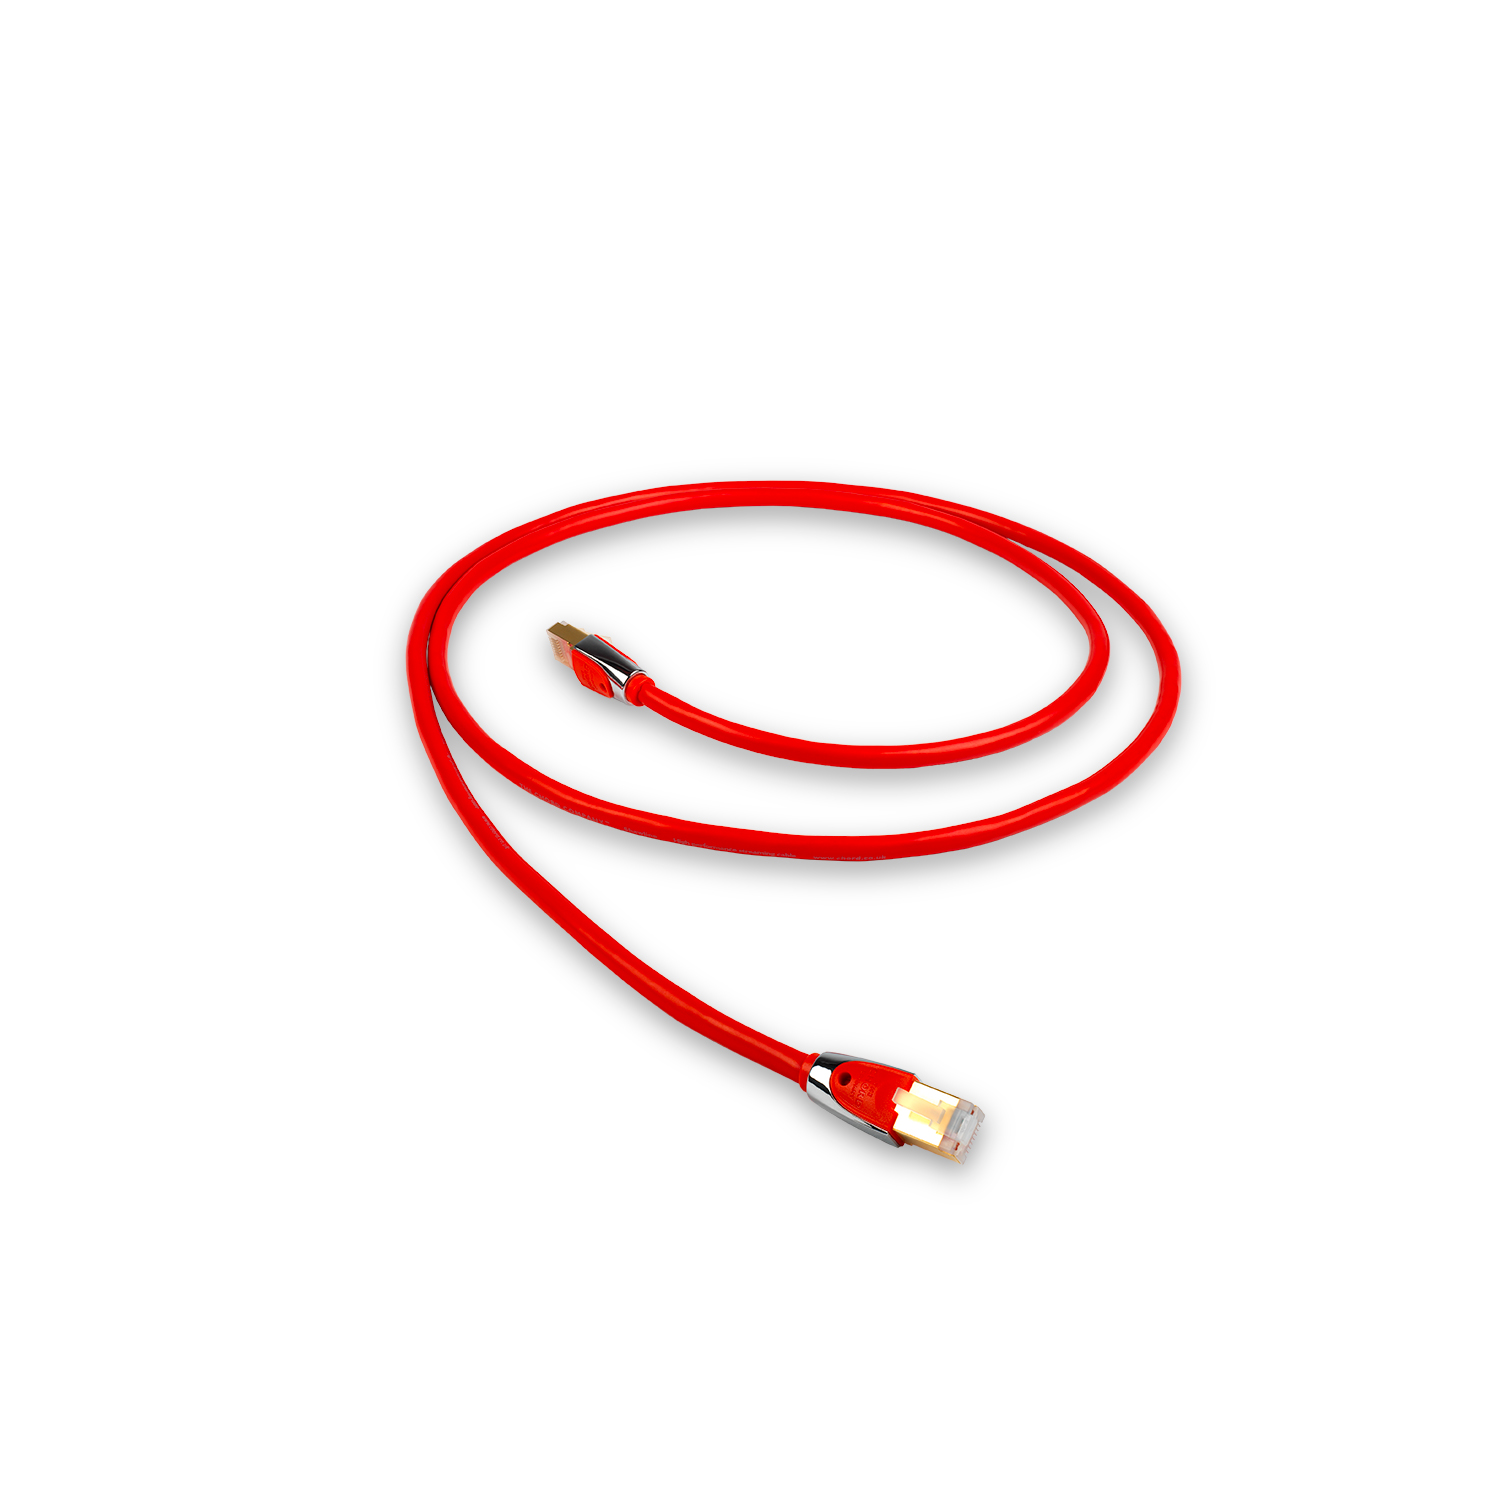 Chord Shawline Streaming Cable